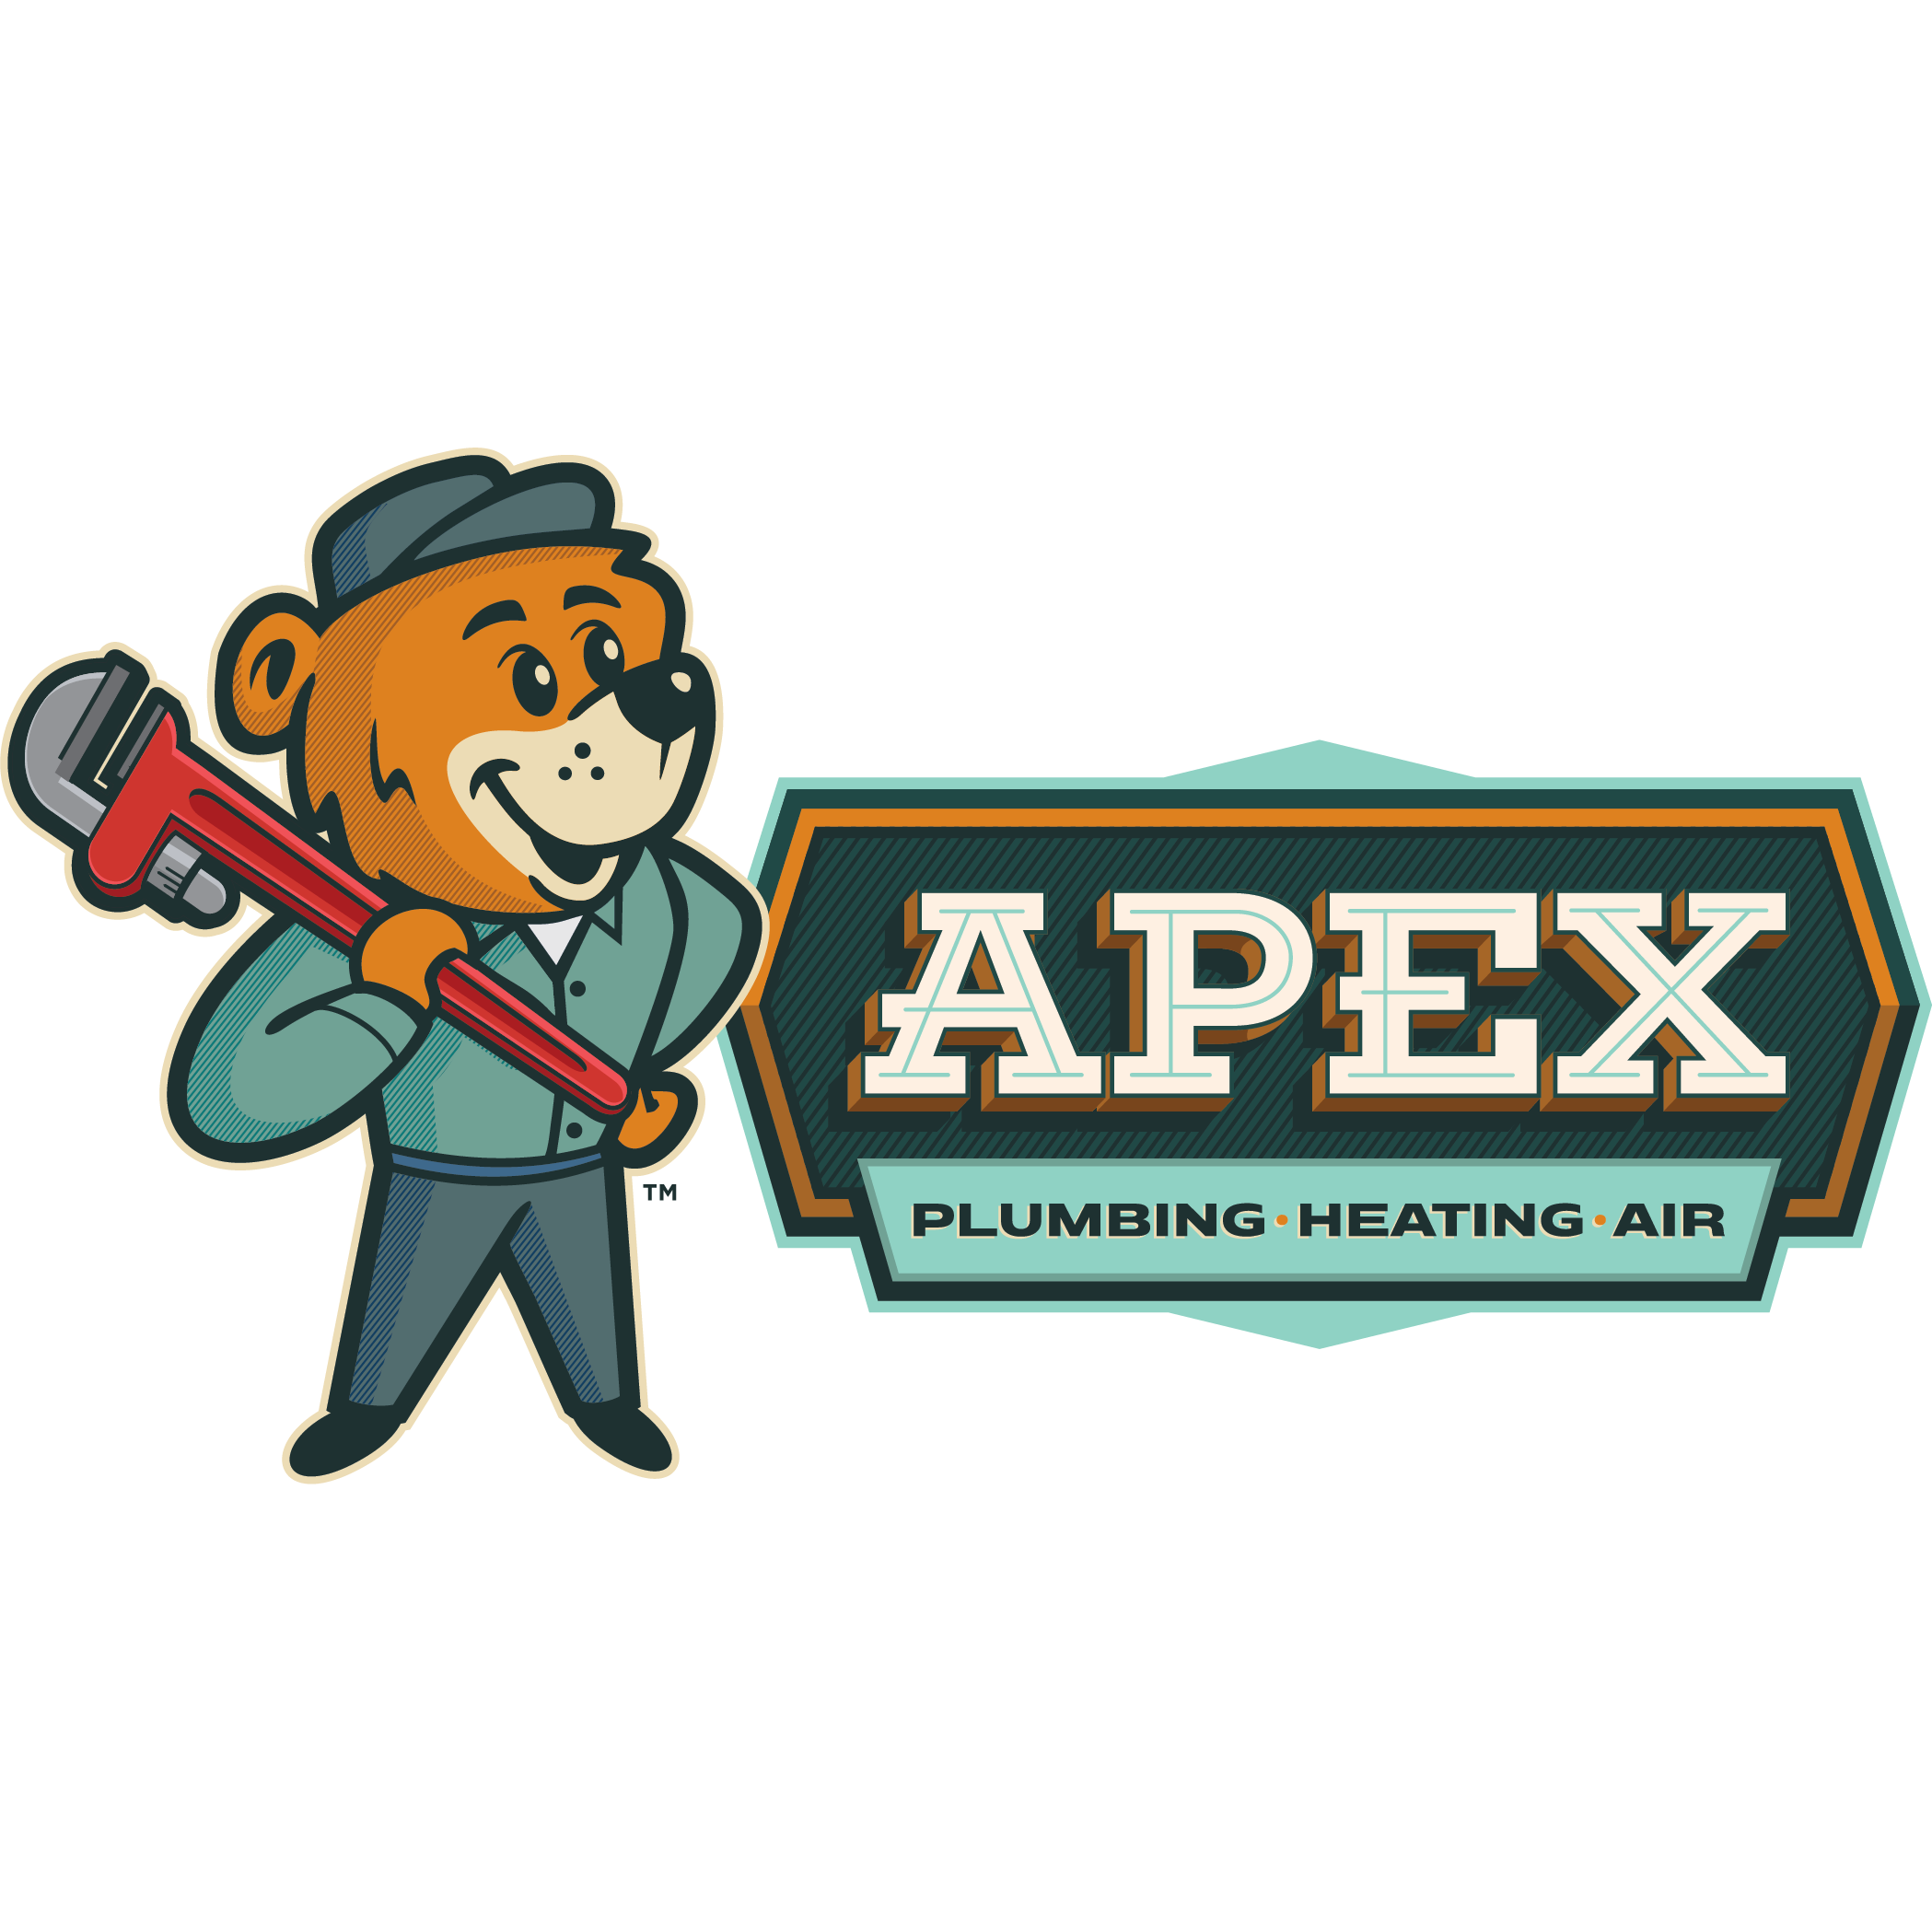 Apex Plumbing, Heating, and Air Pros - Columbus, OH 43229 - (614)697-3855 | ShowMeLocal.com